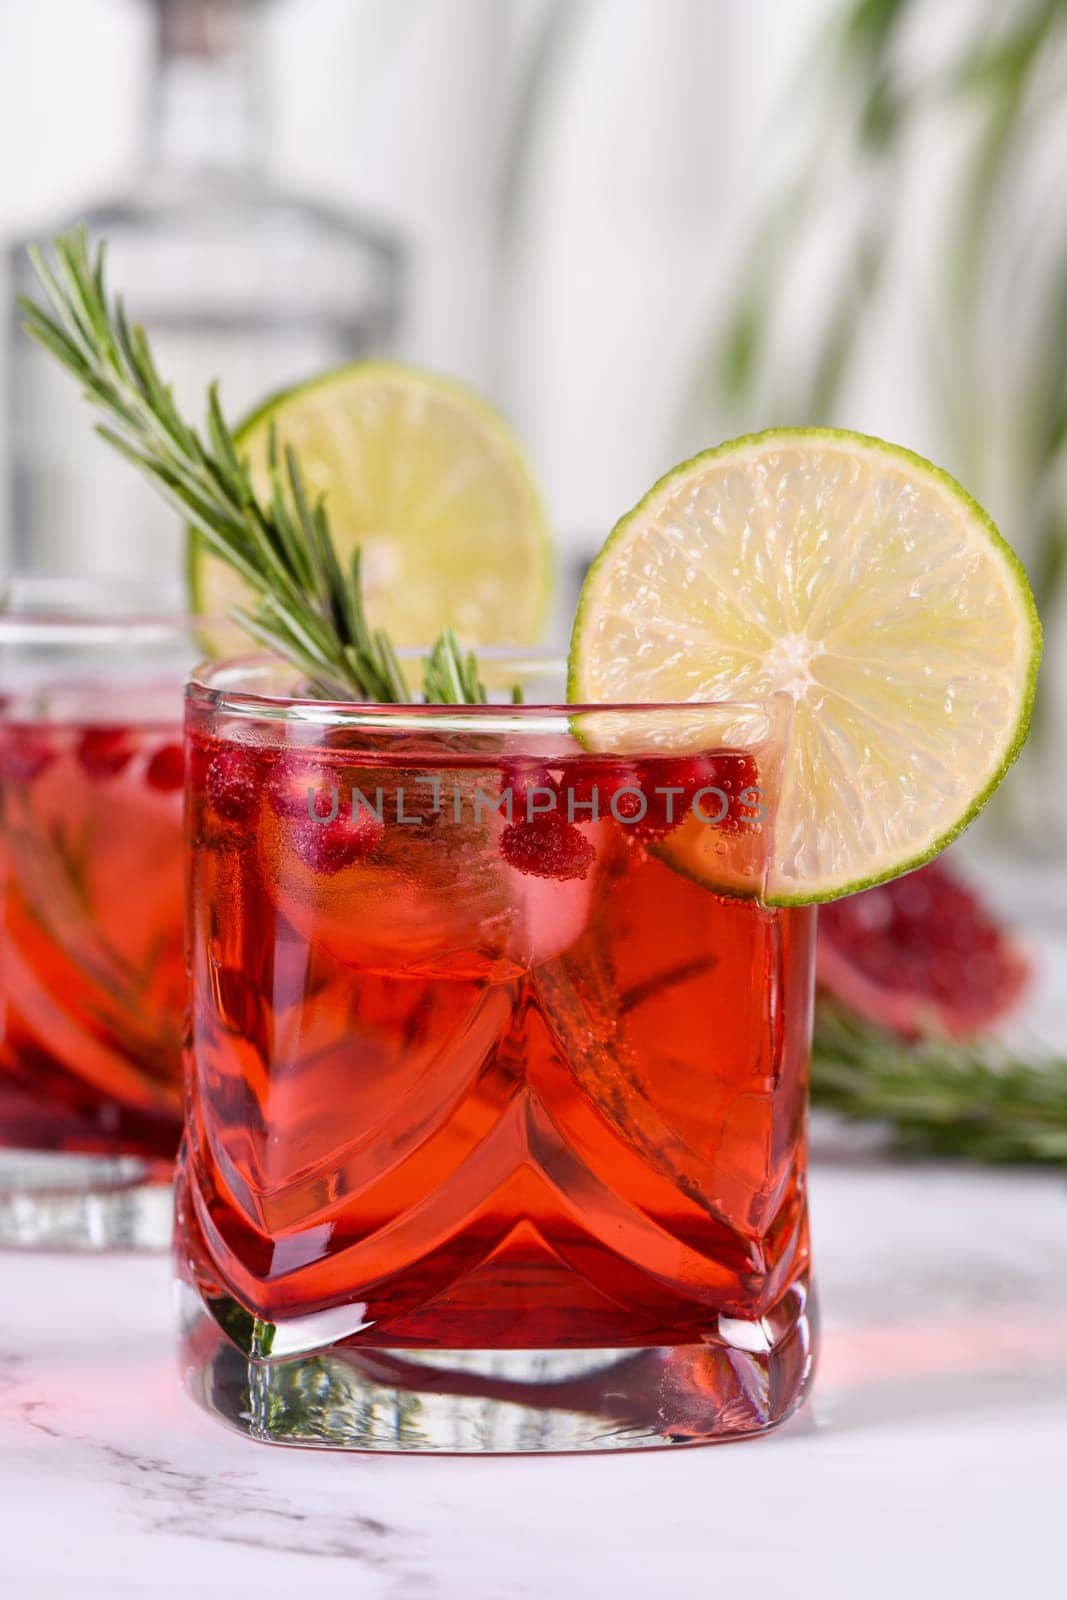  The Pomegranate Paloma is a classic cocktail made with grenadine, soda and a generous dose of tequila or gin. Ideal for holiday celebrations.